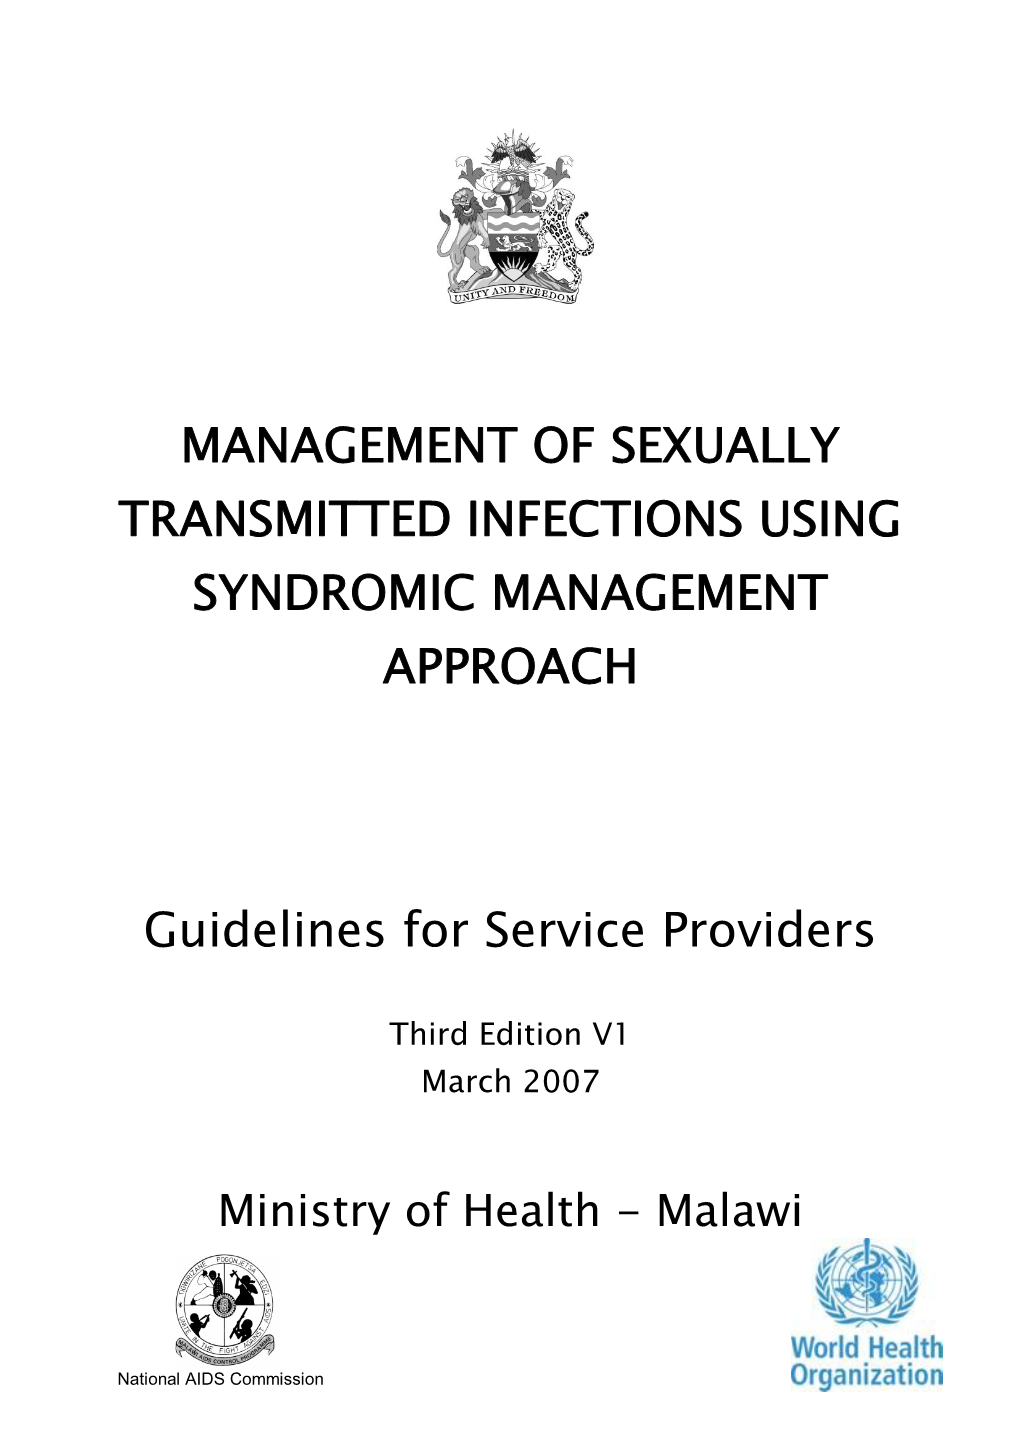 Management of Sexually Transmitted Infections Using Syndromic Management Approach